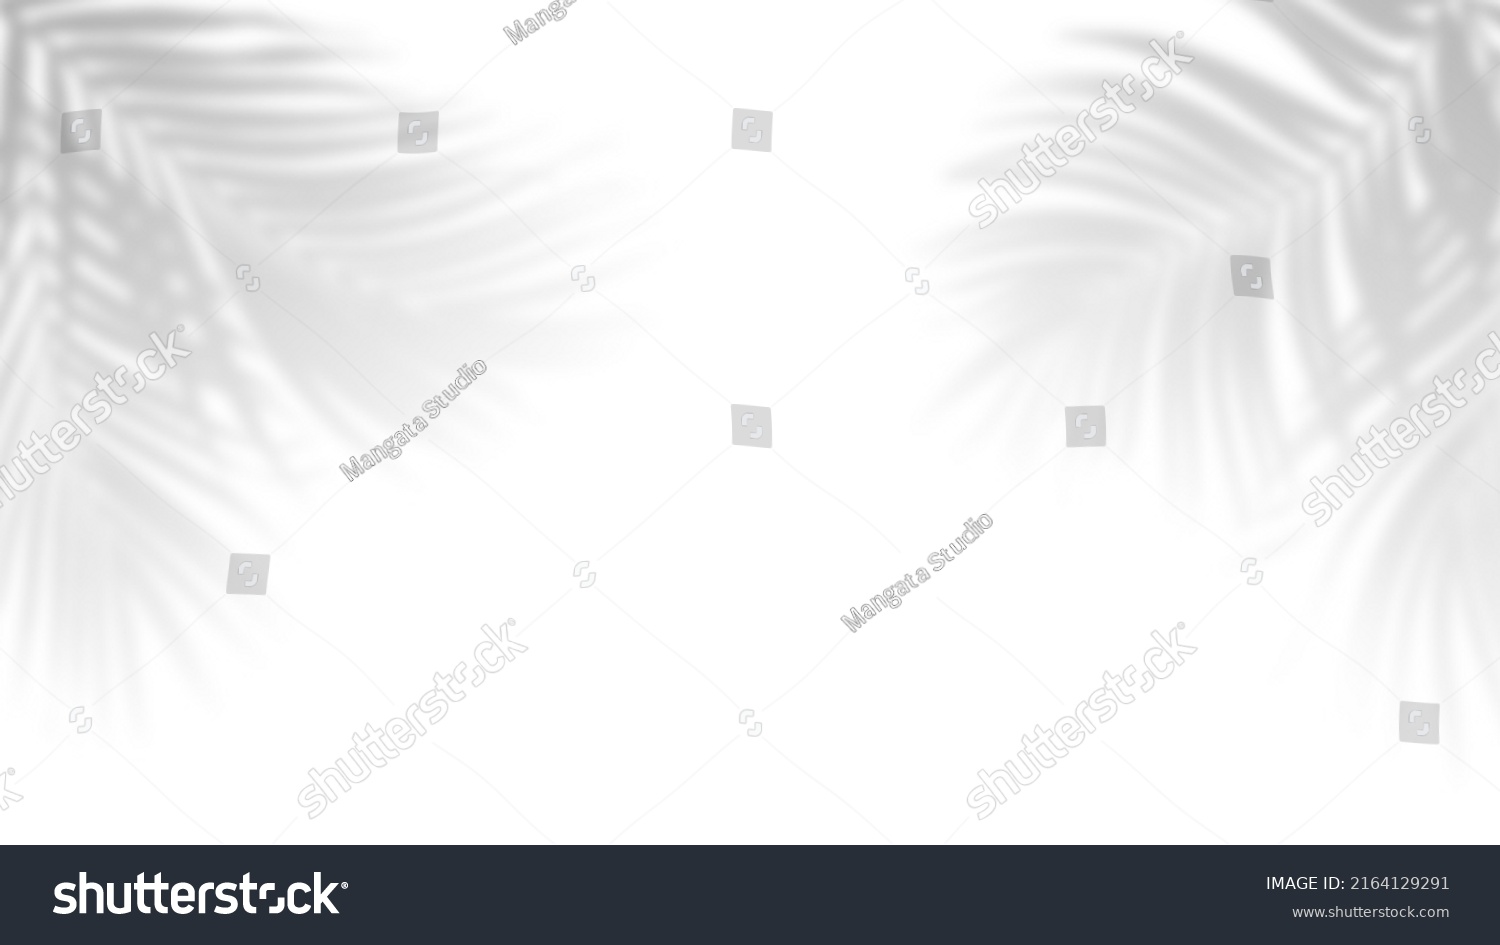 Palm tropical leaves shadow overlay on white background #2164129291